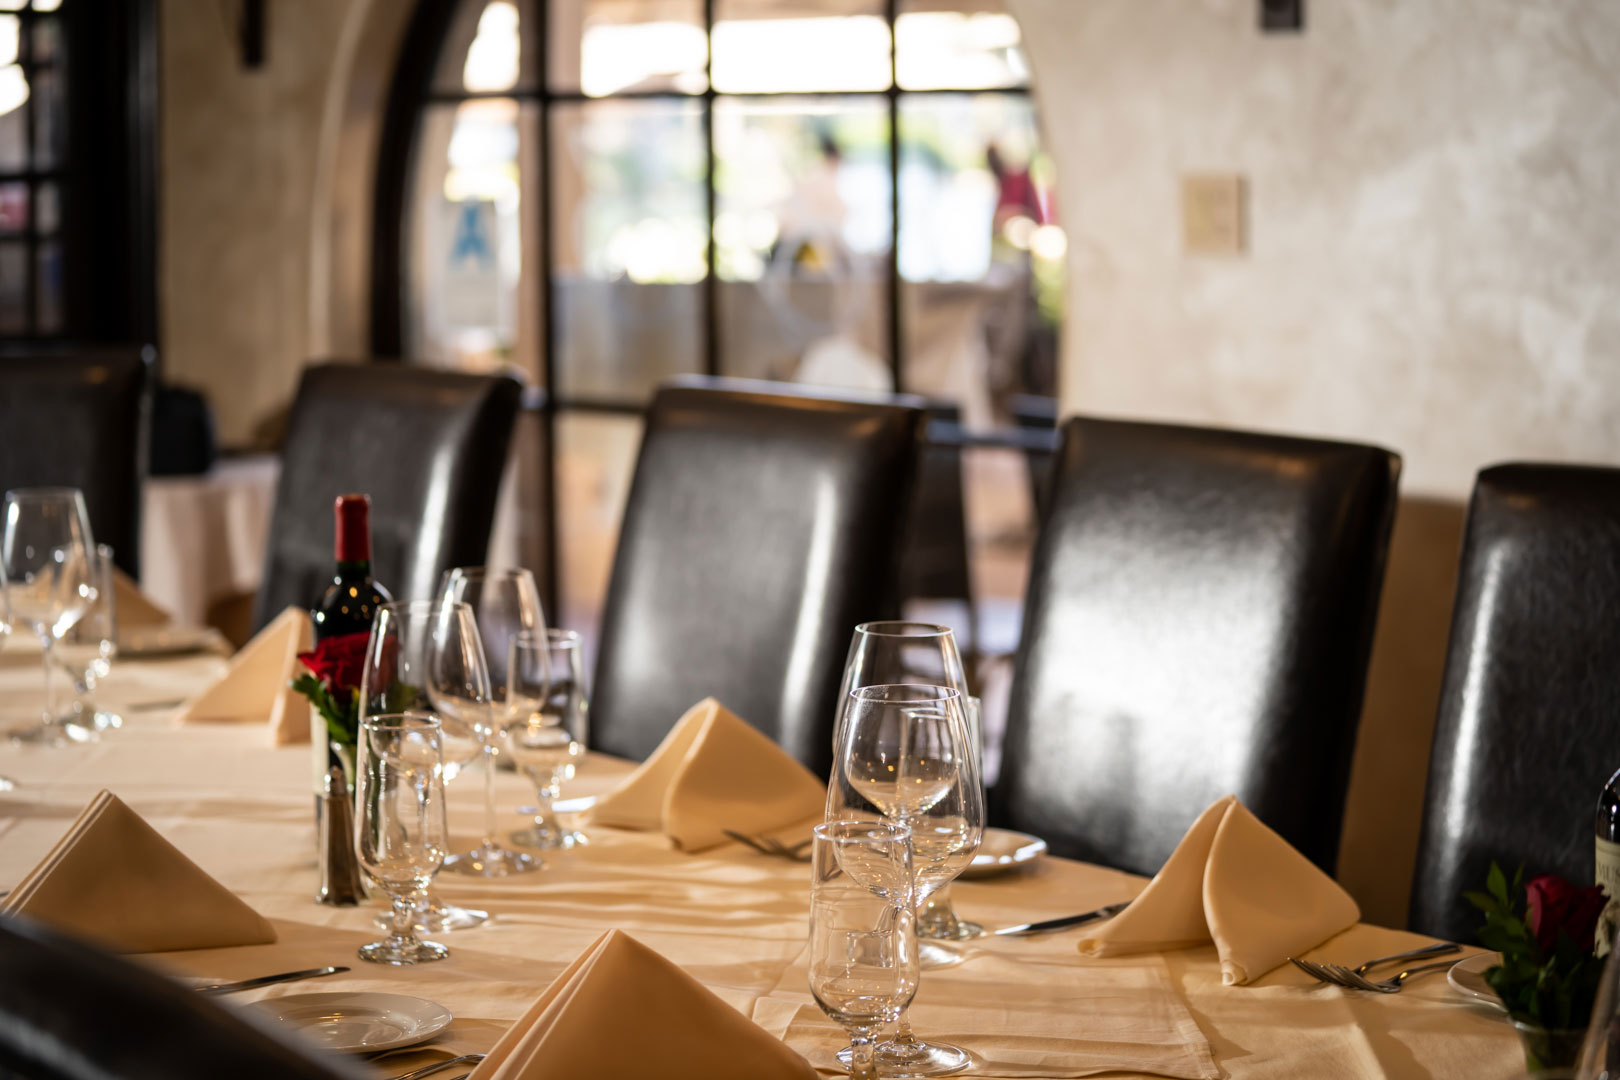 Boccaccio's private wine room with a banquet table set up for a private event